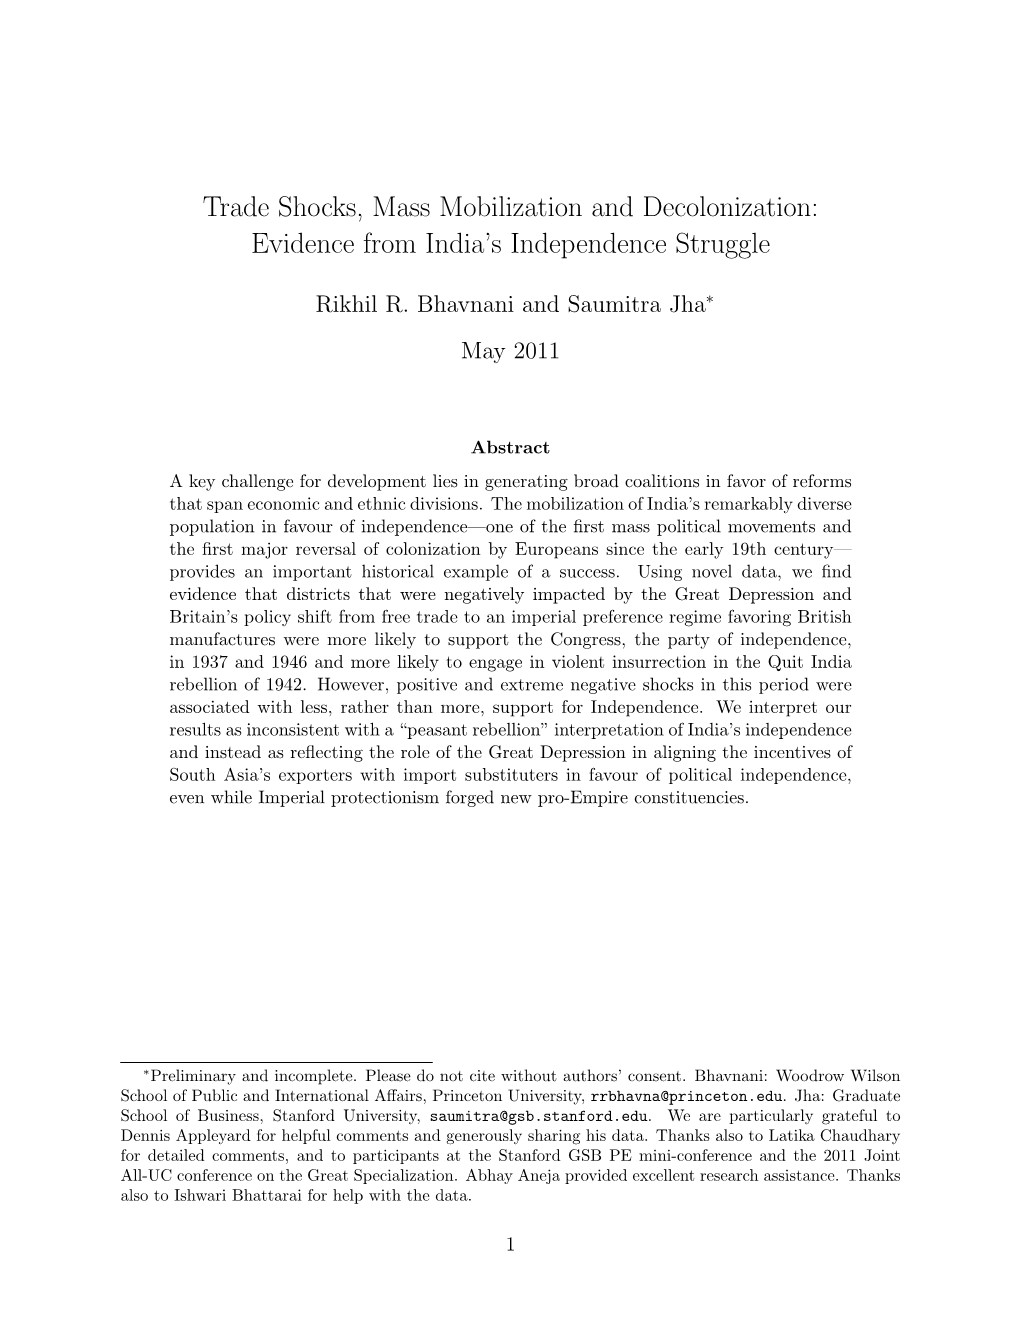 Trade Shocks, Mass Mobilization and Decolonization: Evidence from India’S Independence Struggle